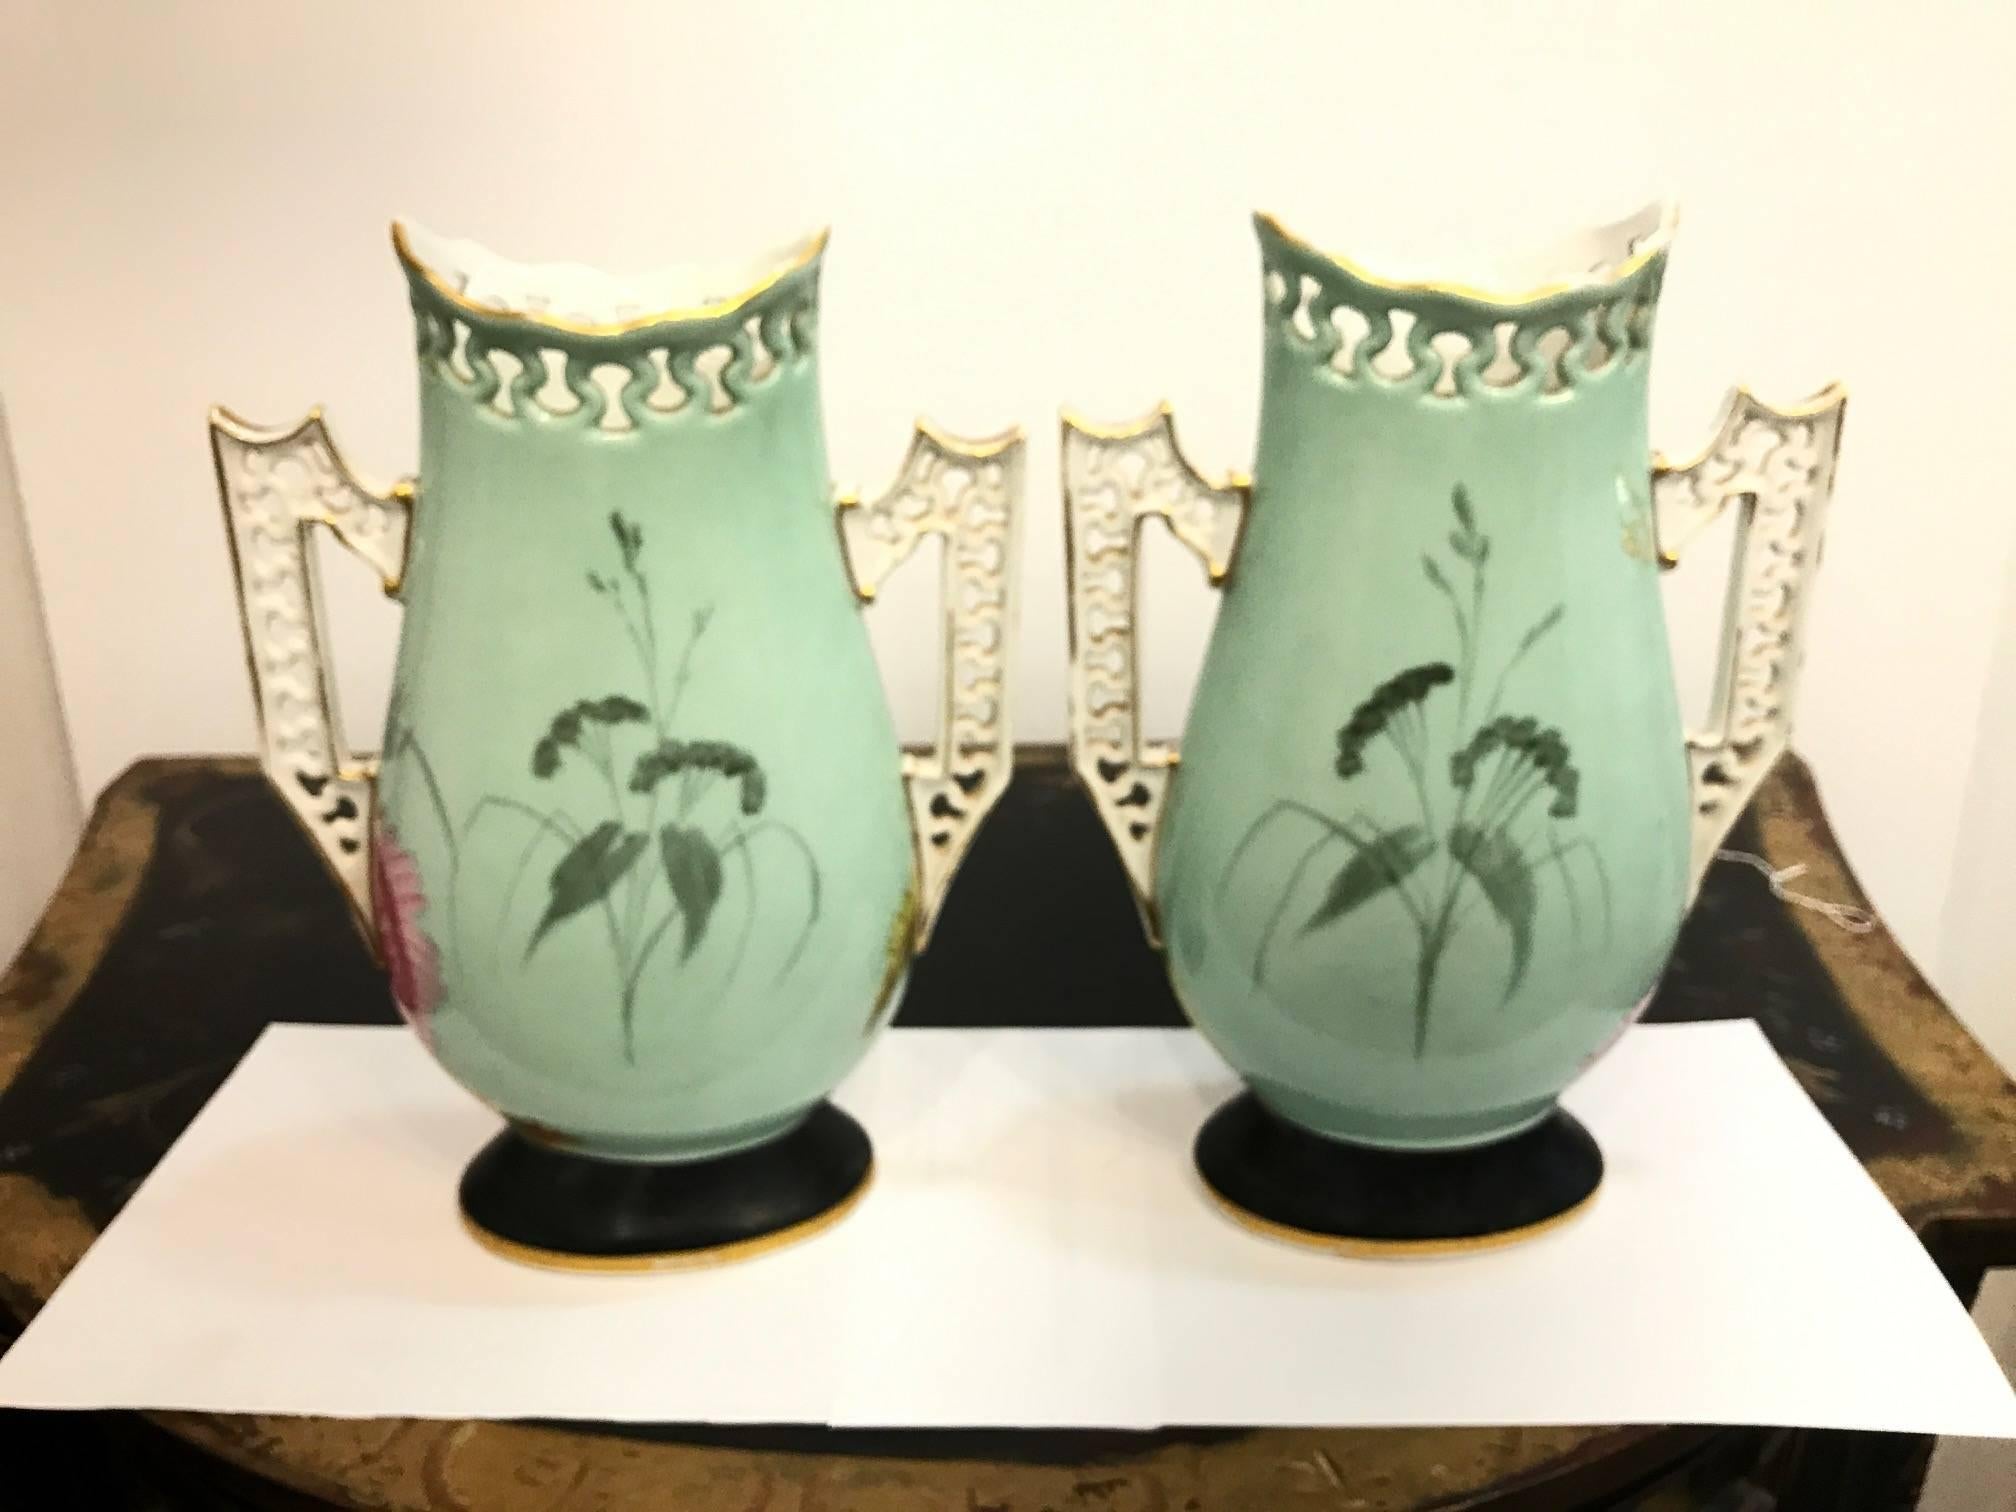 Aesthetic Movement Pair of 19th Century French Porcelain Hand-Painted Vases